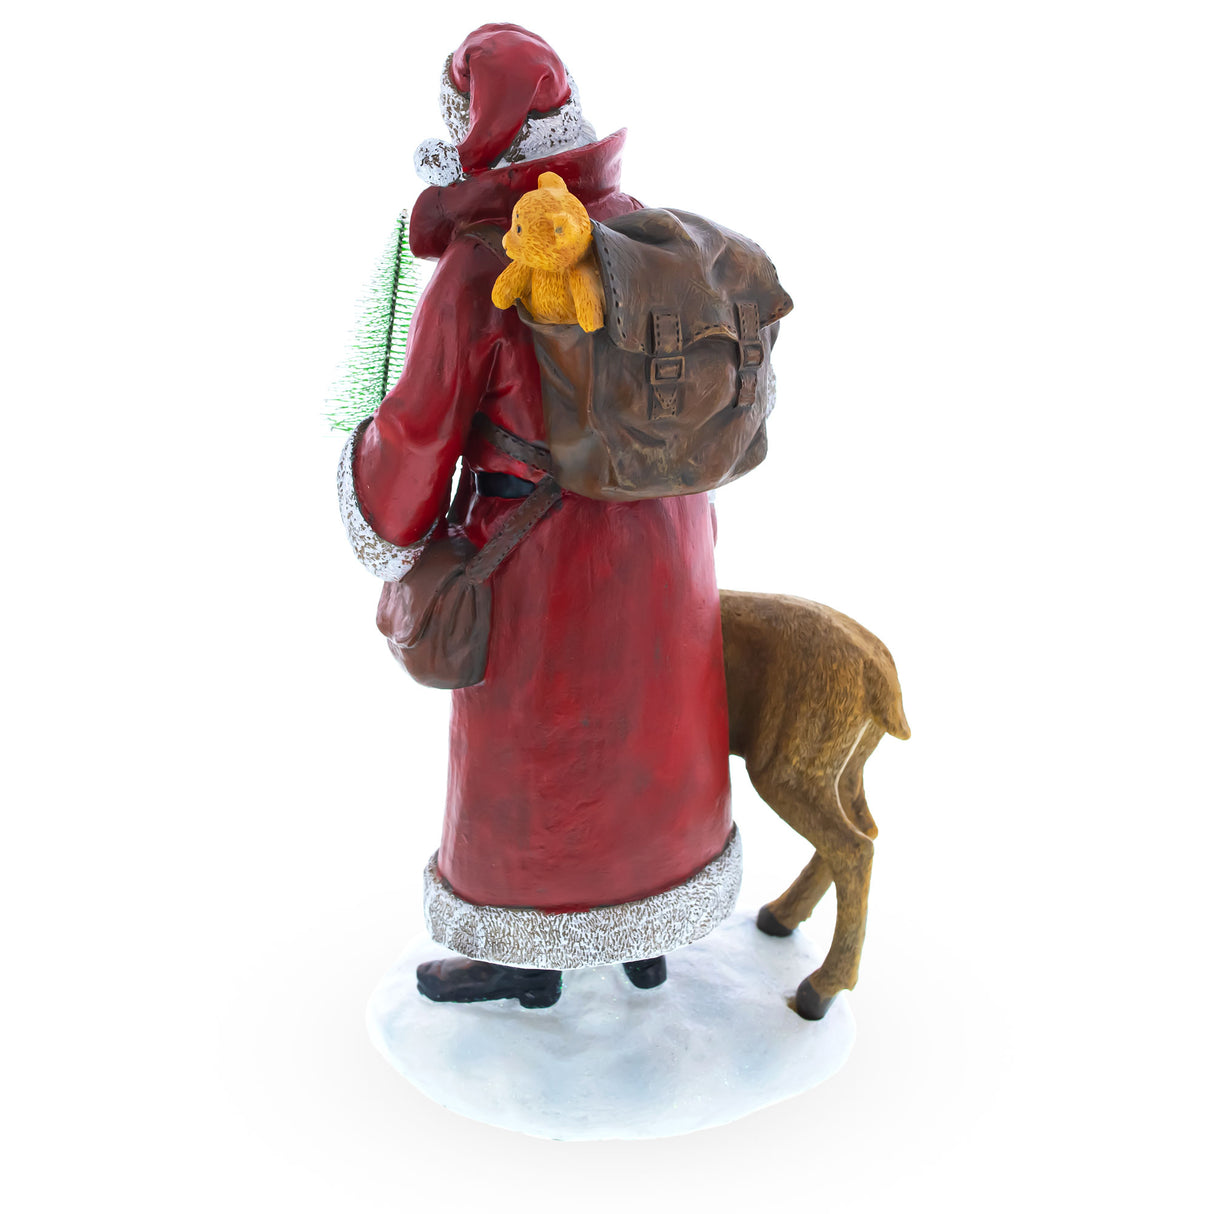 Shop Santa Holding Christmas Tree and Bell by Reindeer Figurine 12 Inches. Resin Christmas Decor Figurines Santa AL for Sale by Online Gift Shop BestPysanky